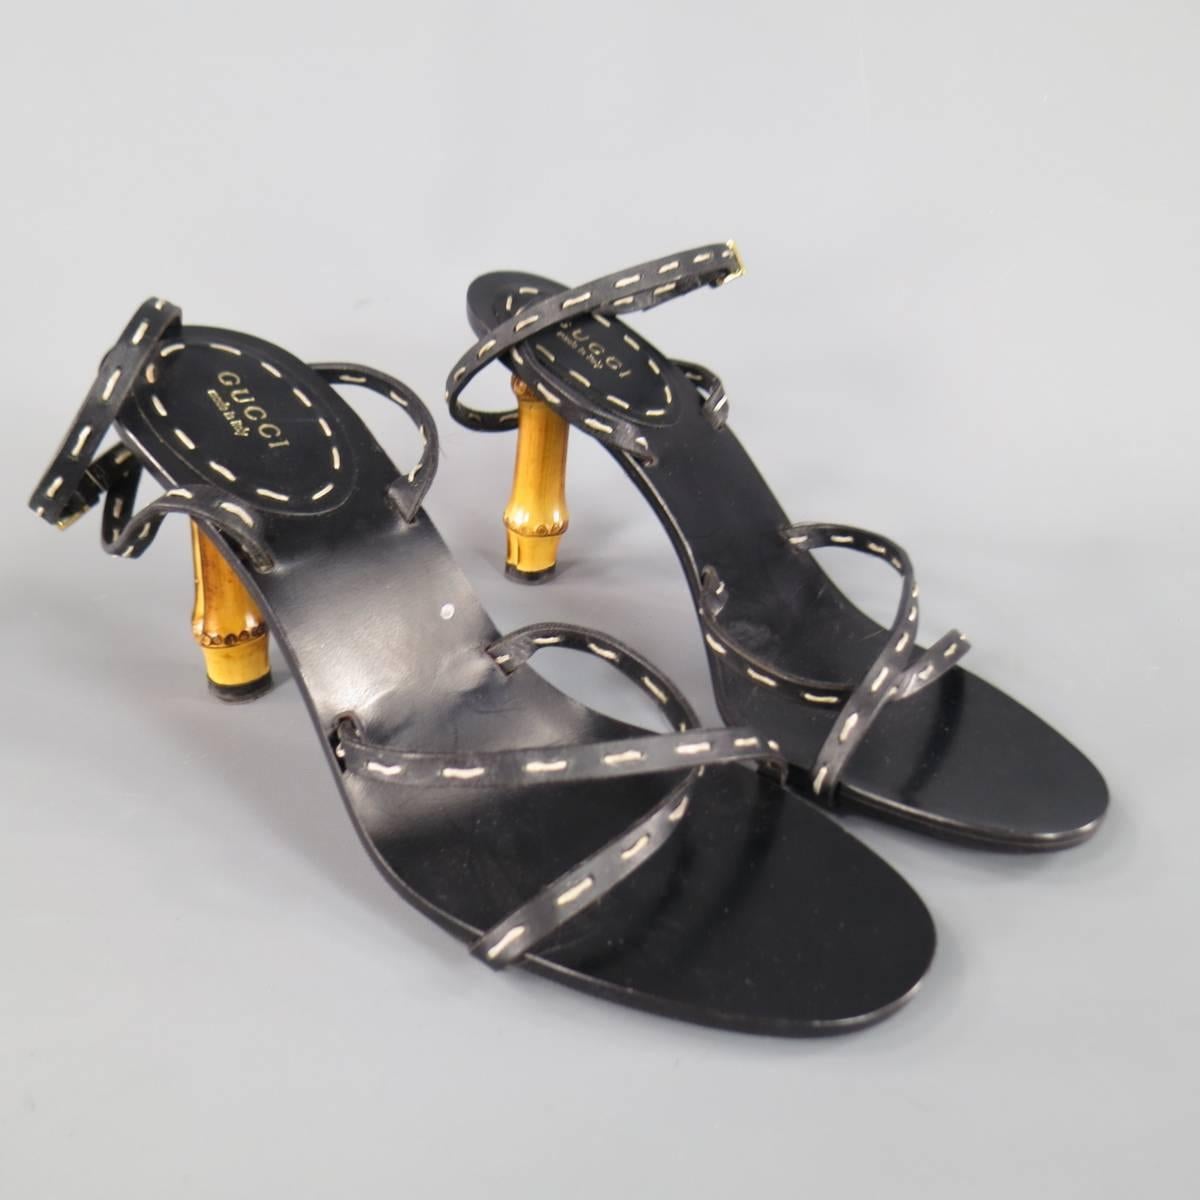 These fabulous GUCCI sandals feature thin black leather cross straps with contrast stitching and a thick bamboo heel. With Box. Made in Italy.
 
Excellent Pre-Owned Condition.
Marked: IT 38 C
 
Heel: 4 in.